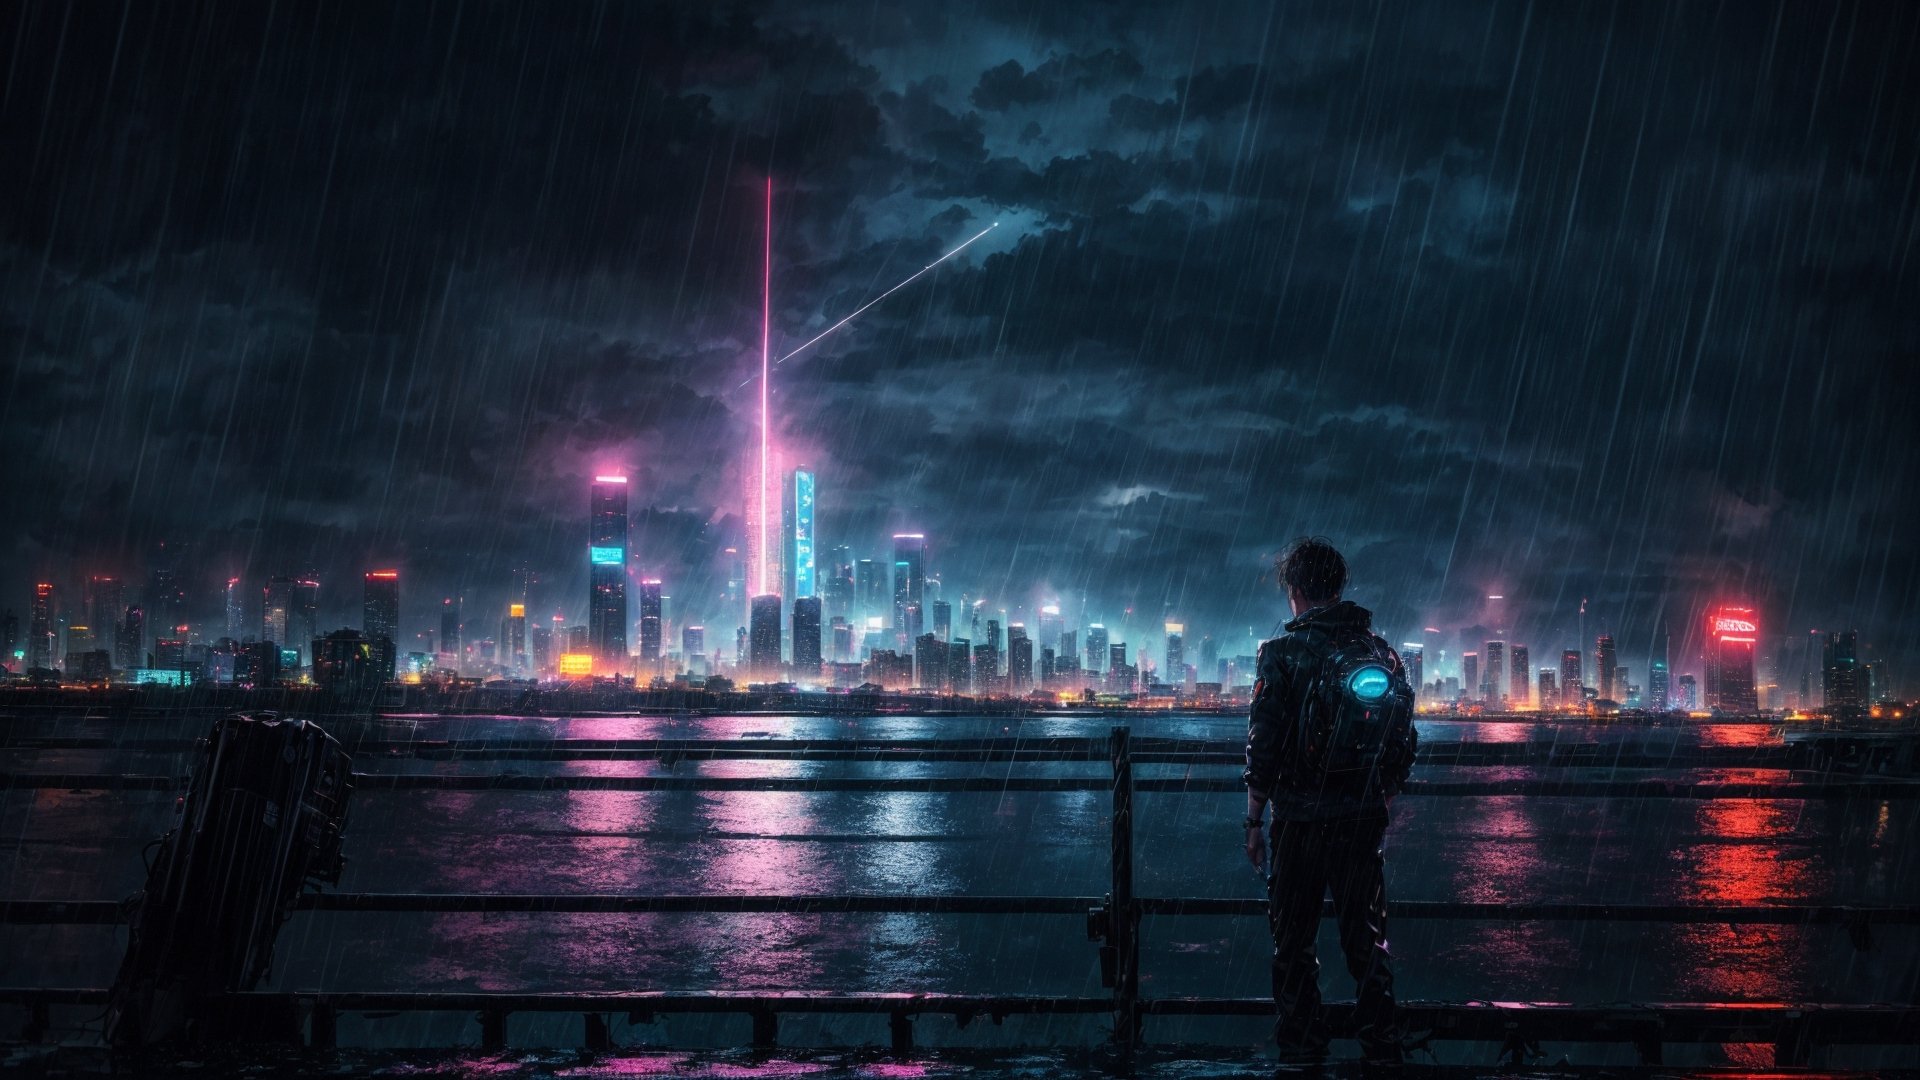 (masterpiece), (ultra detailed), (realistic), (50mm), (prime lens), 1boy, standing top of building, night city, neon light, buildings, beautiful view, raining, water drops, dynamic angle, lofi,EpicSky,ink scenery,6000,cyberpunk style, The sea exposed to nuclear radiation,